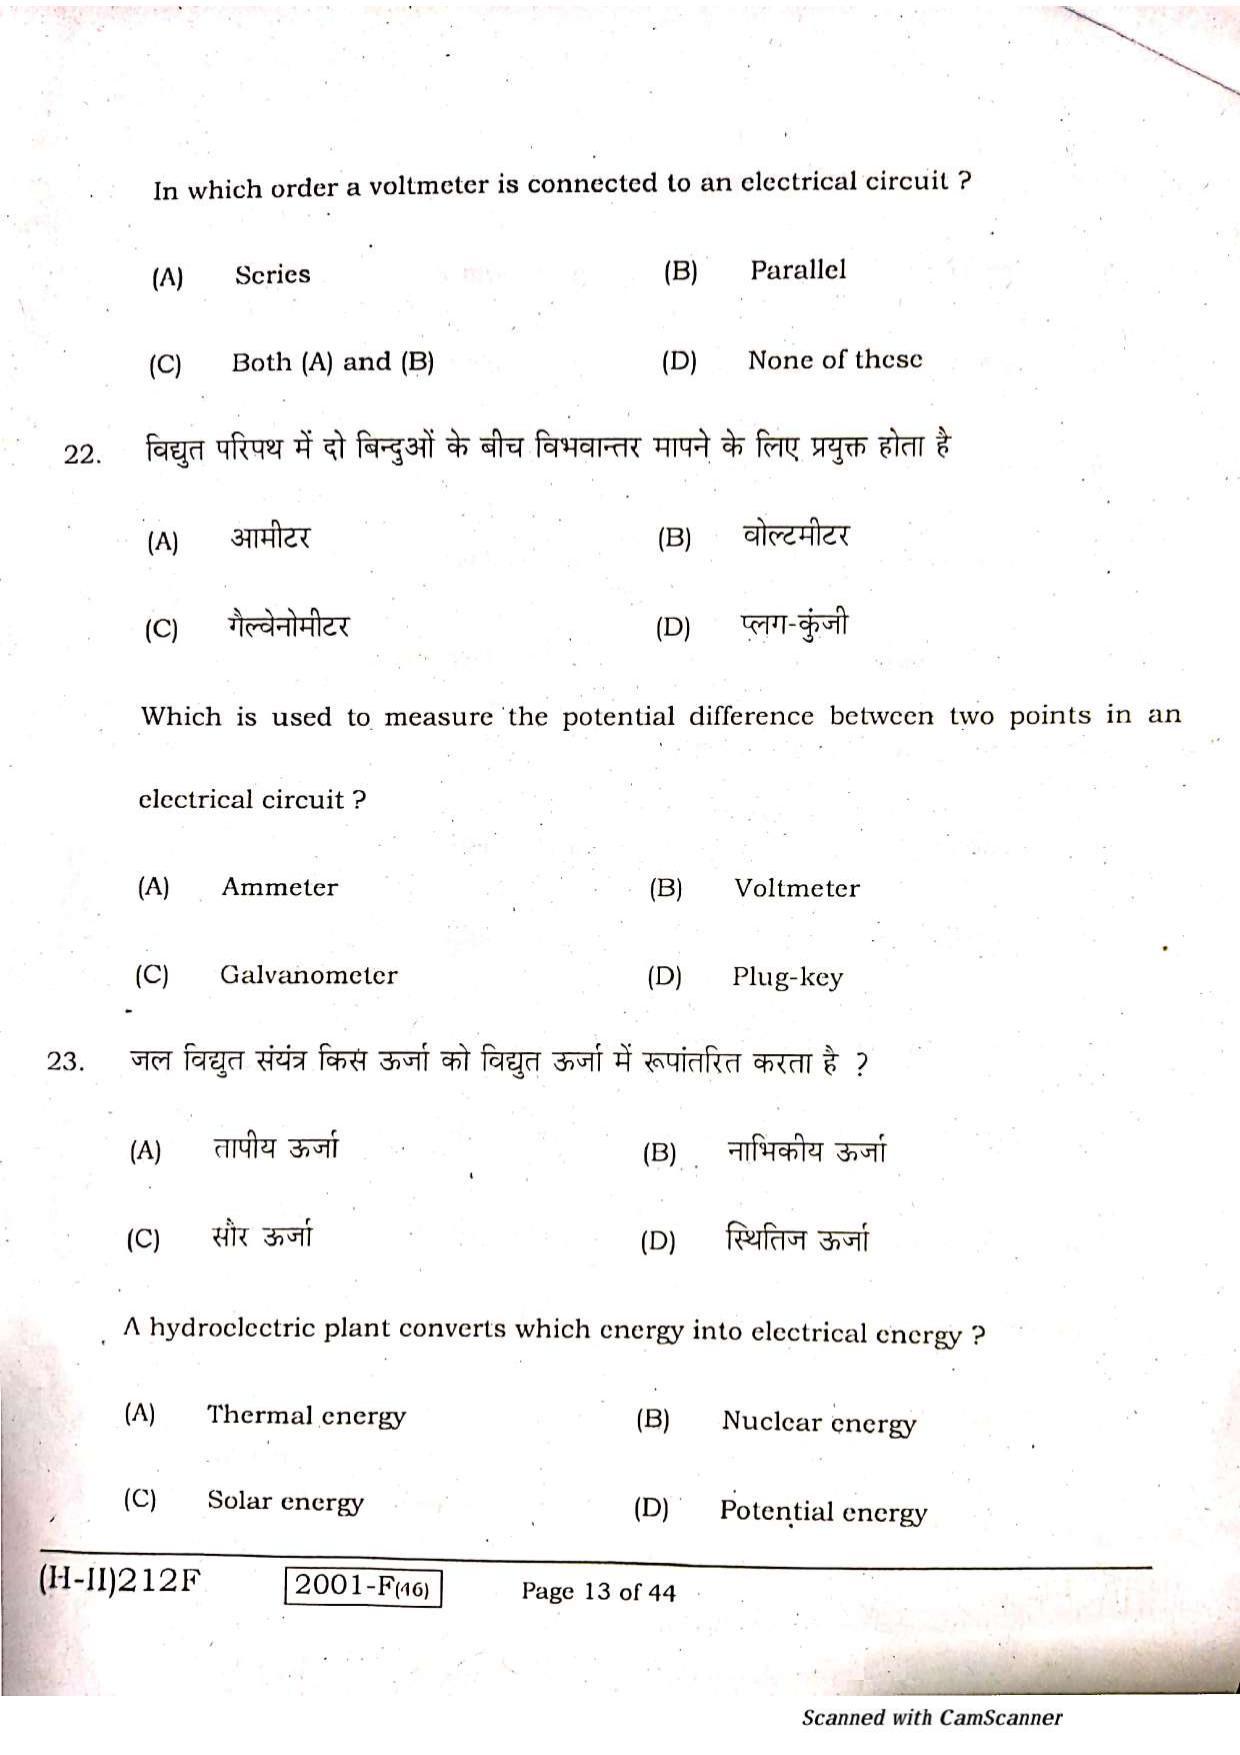 Bihar Board Class 10 Science 2021 (2nd Sitting) Question Paper - Page 11